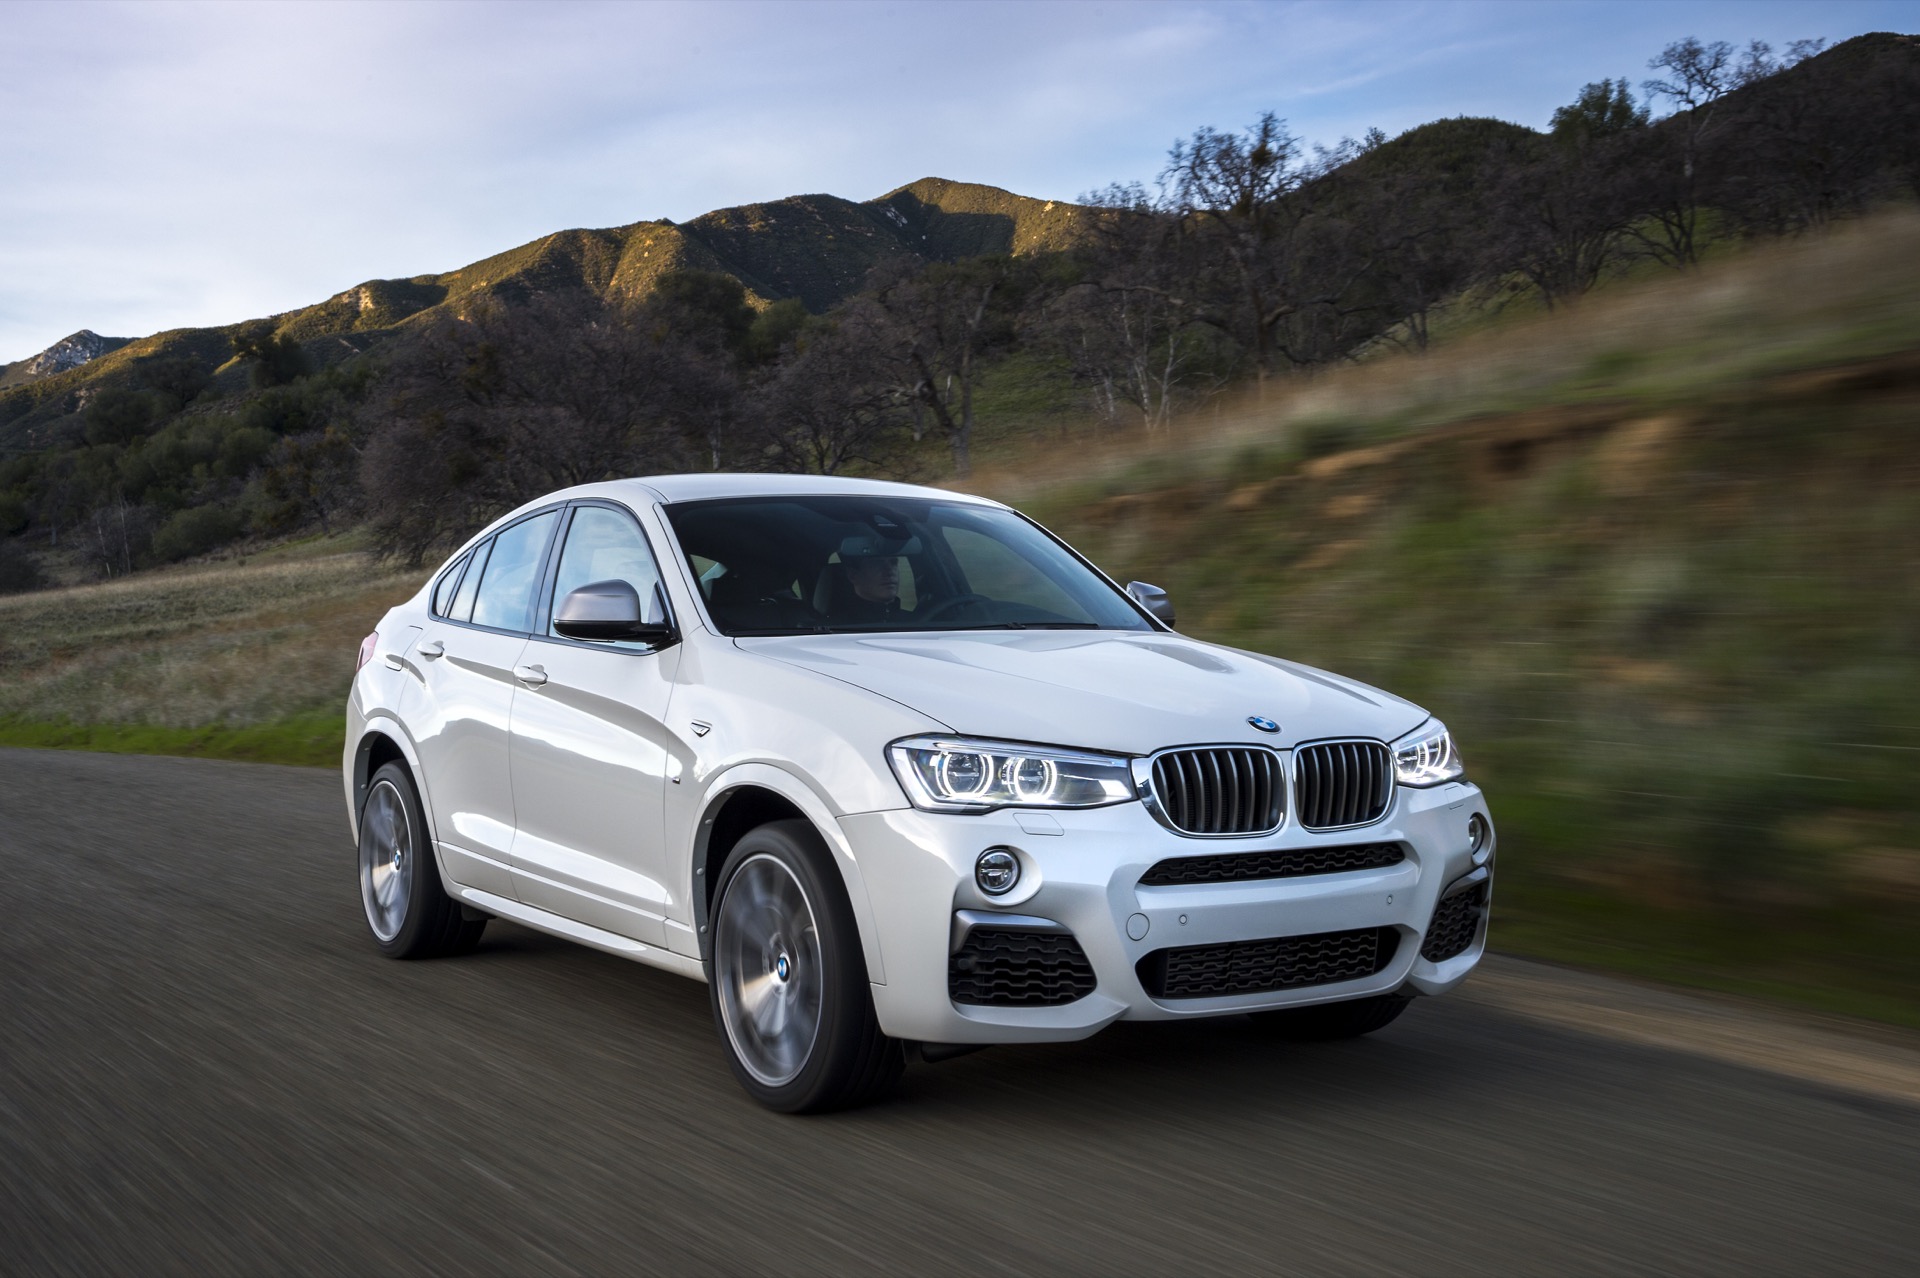 2016 BMW X4 Review, Ratings, Specs, Prices, and Photos - The Car Connection